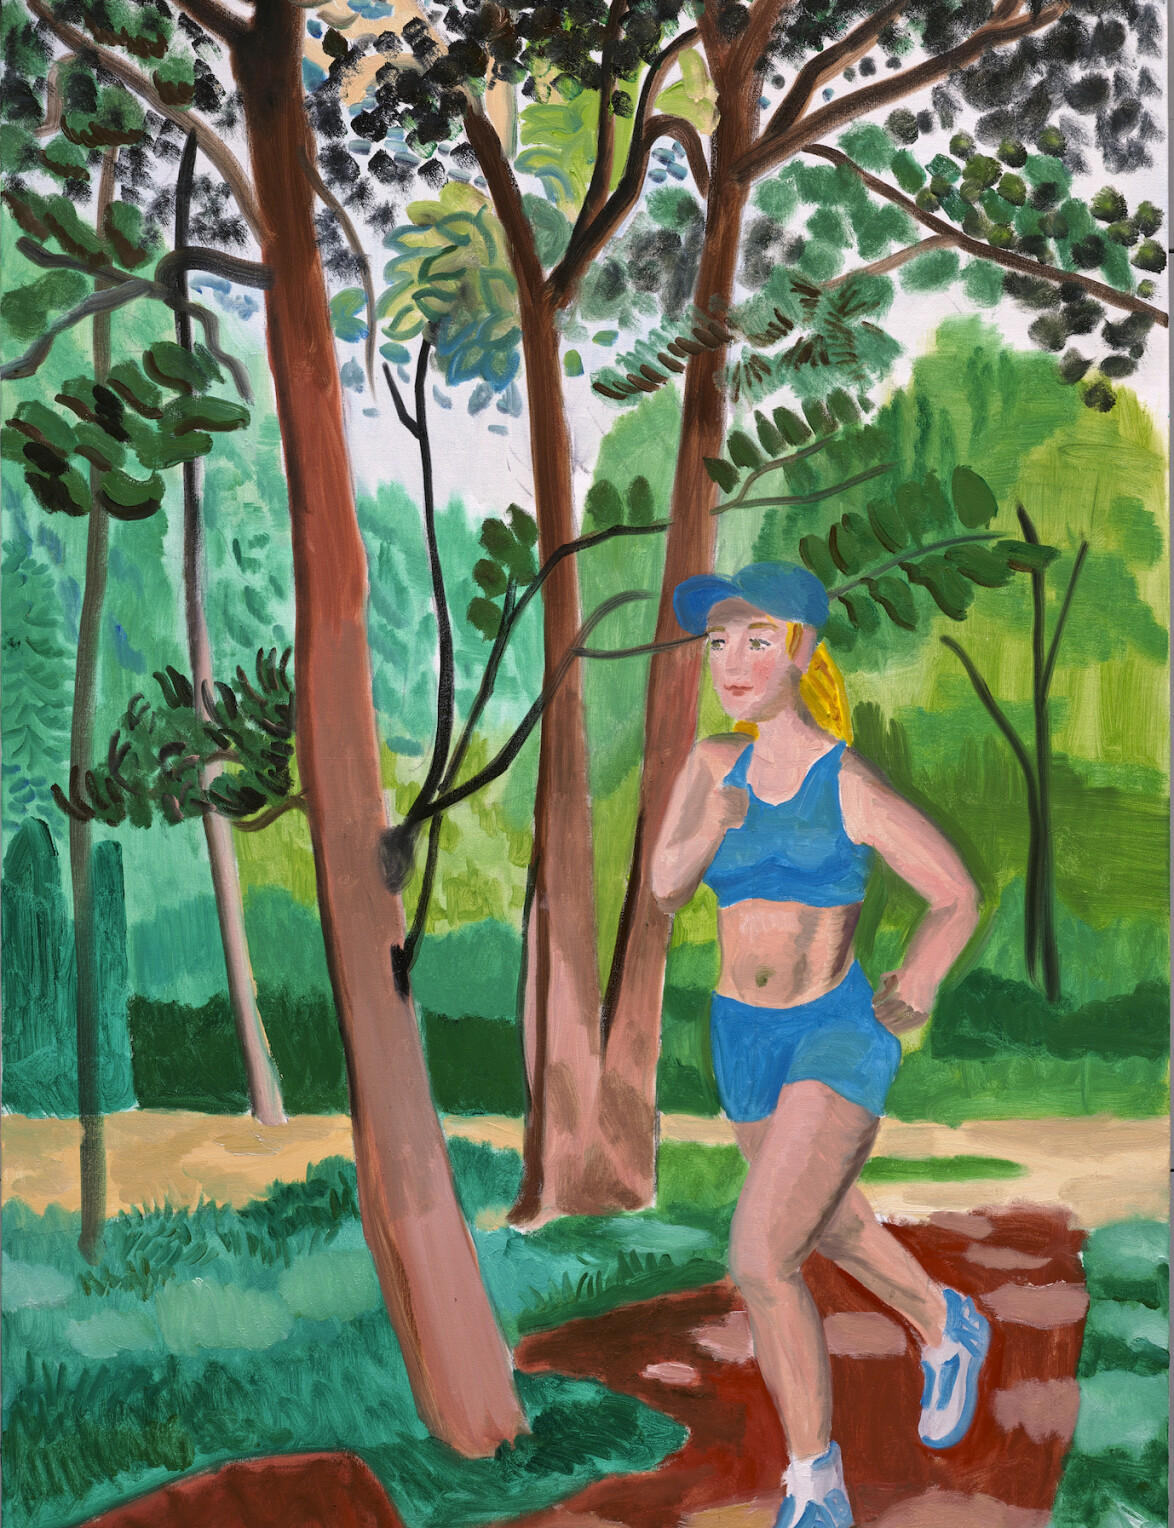 YANG Lee
Wander Series - Jogging in The Forest of Matisse
2022
Oil on canvas
194×130cm